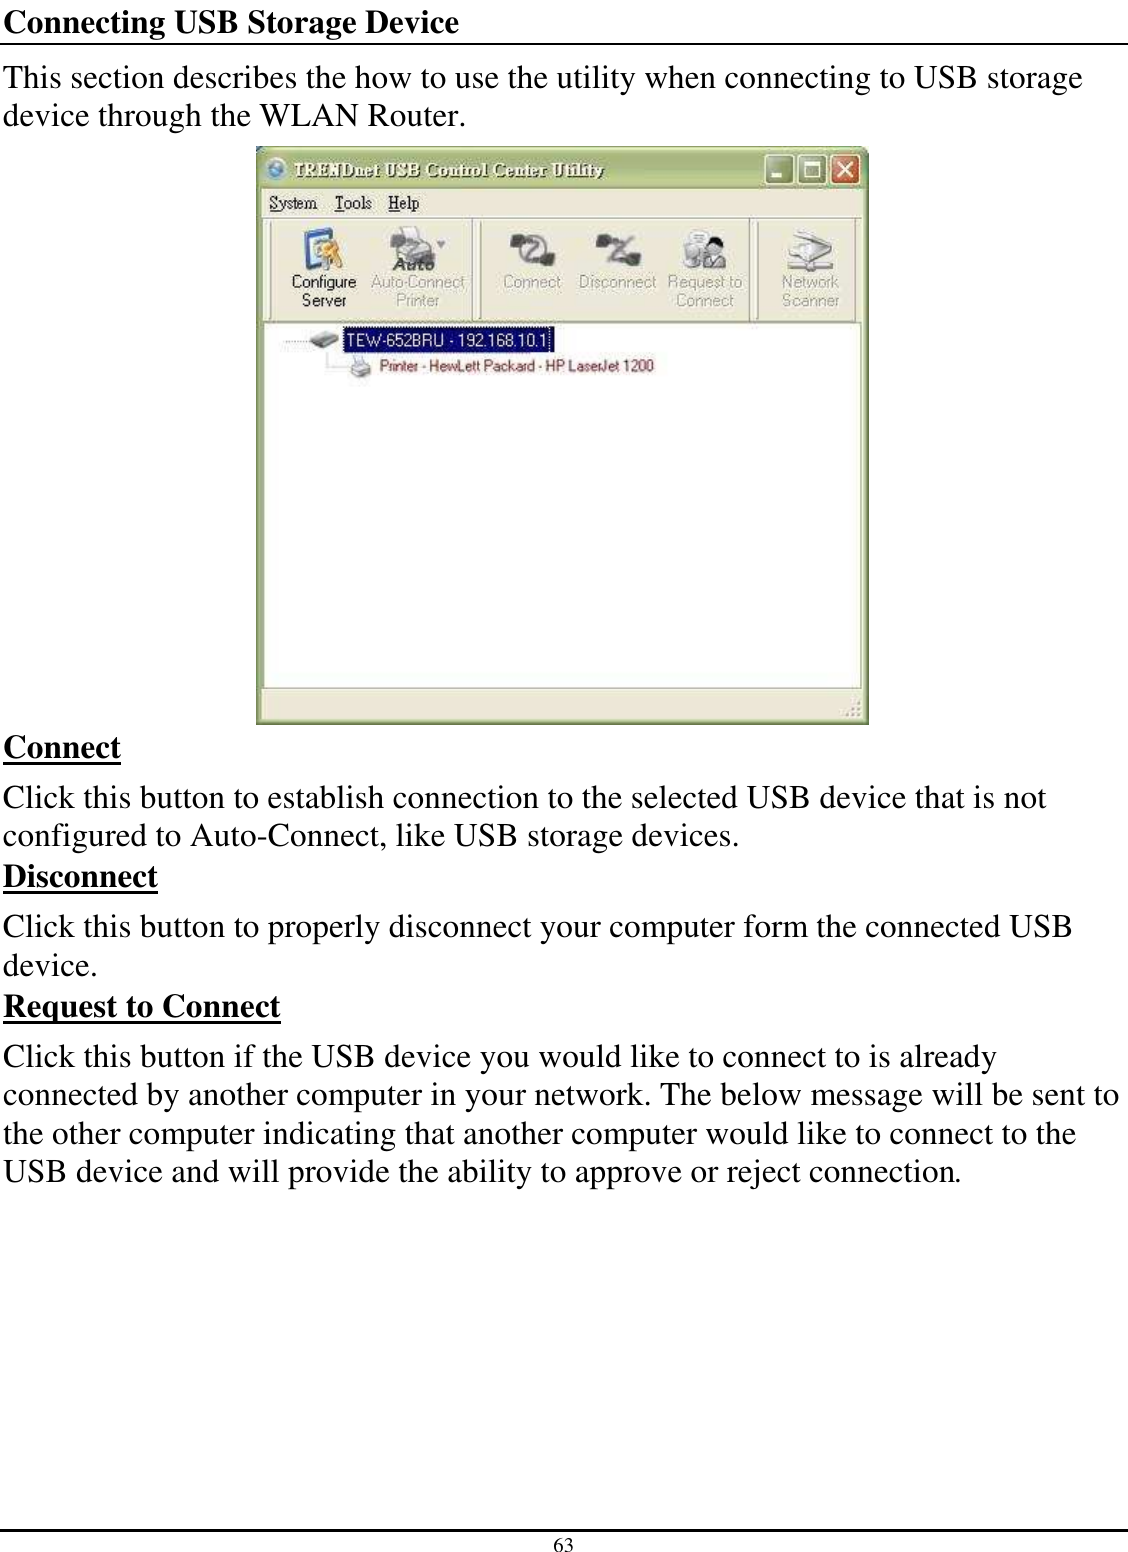 63 Connecting USB Storage Device This section describes the how to use the utility when connecting to USB storage device through the WLAN Router.   Connect Click this button to establish connection to the selected USB device that is not configured to Auto-Connect, like USB storage devices.  Disconnect Click this button to properly disconnect your computer form the connected USB device.  Request to Connect Click this button if the USB device you would like to connect to is already connected by another computer in your network. The below message will be sent to the other computer indicating that another computer would like to connect to the USB device and will provide the ability to approve or reject connection.  